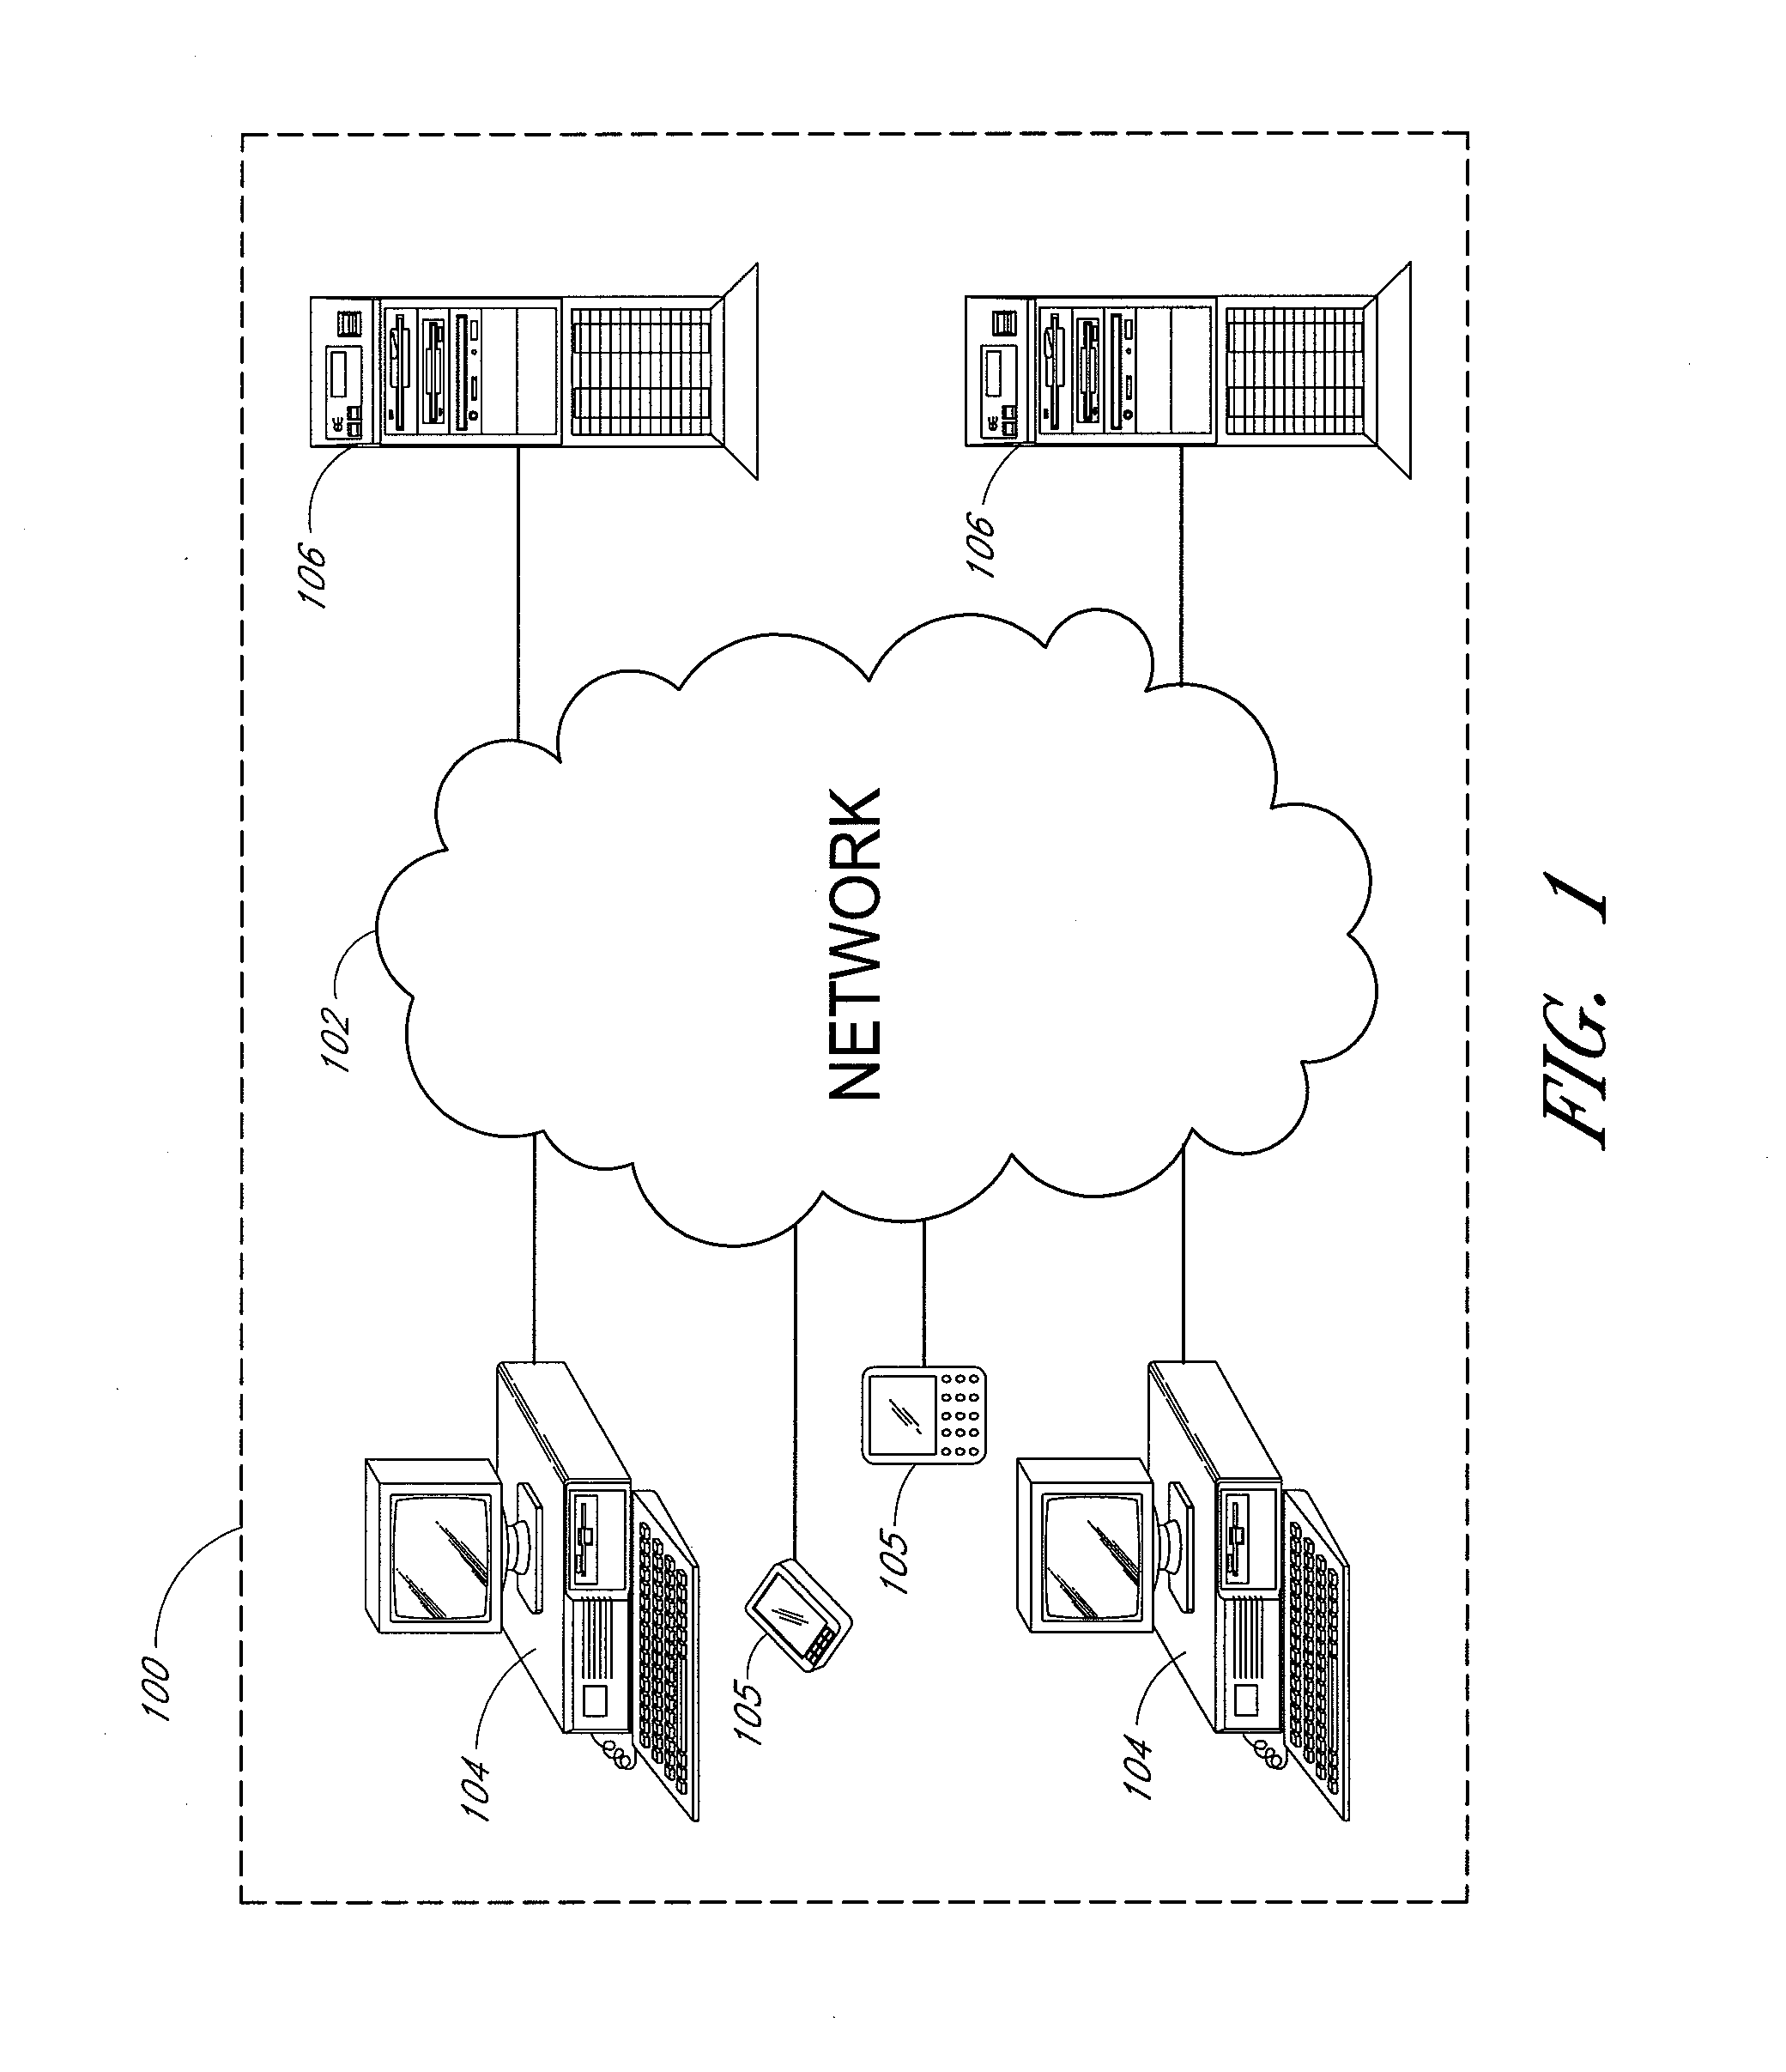 System and method for using a mobile electronic device to optimize an energy management system